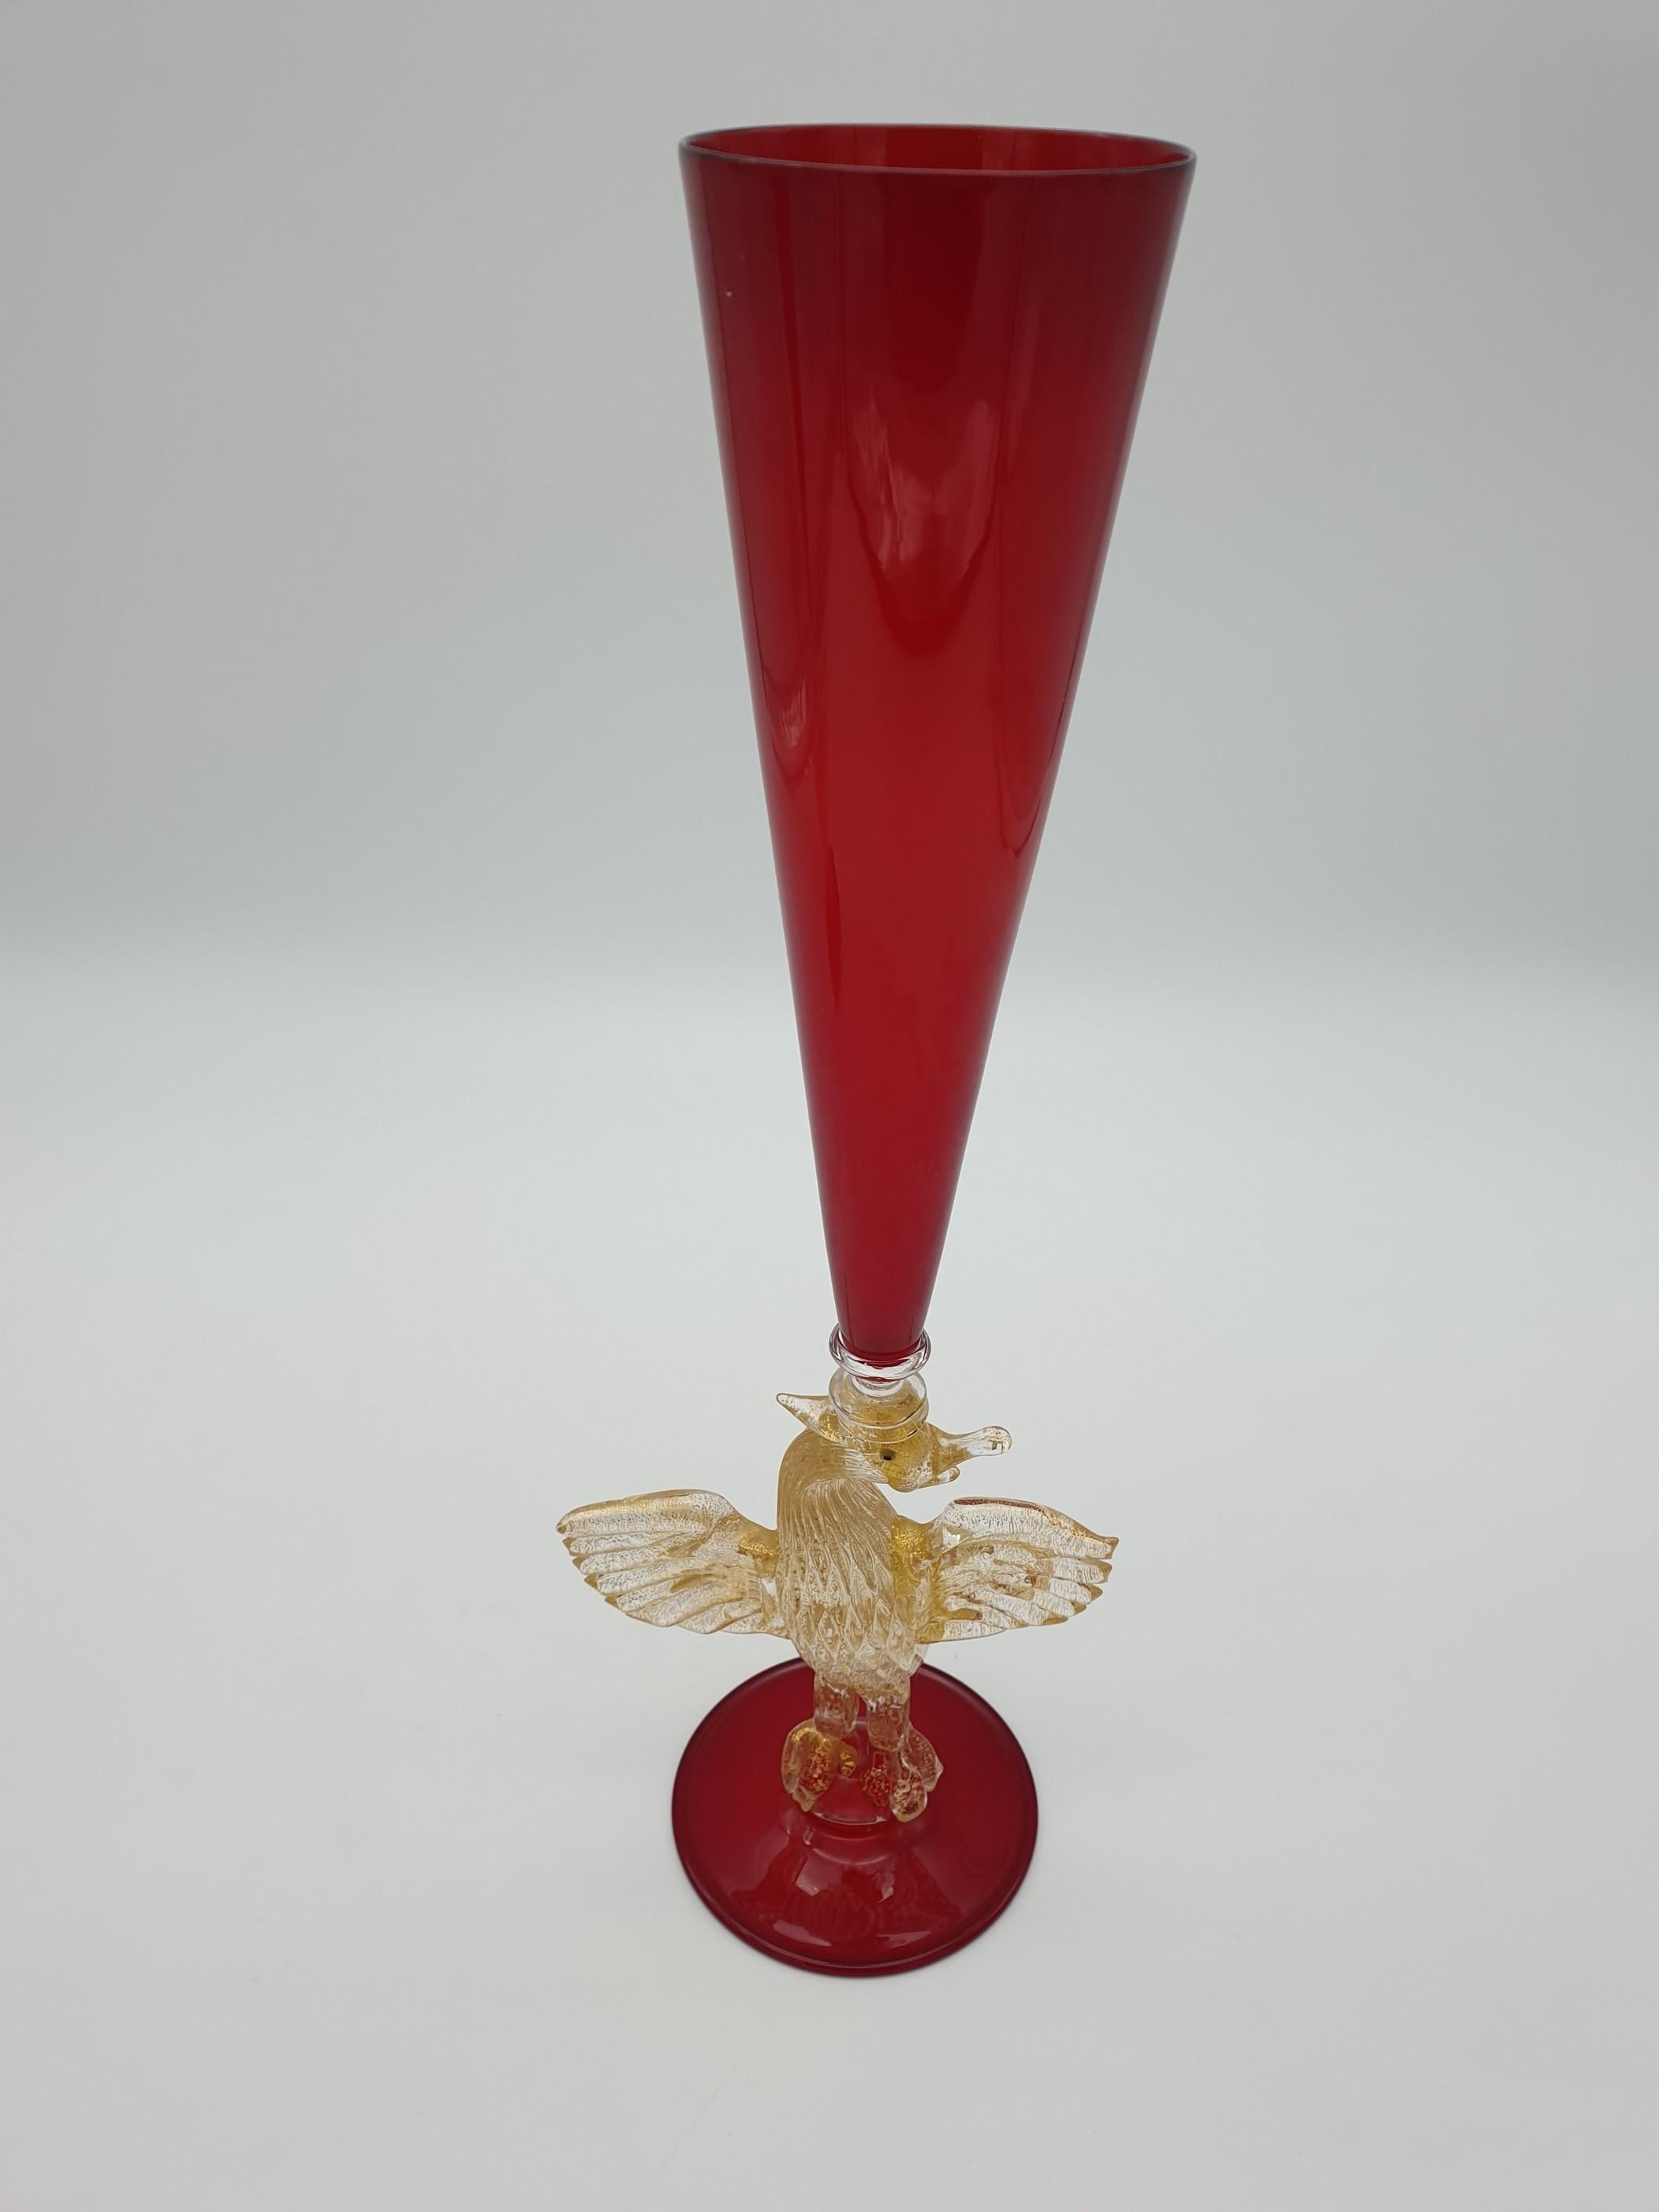 Pair of Modern Murano Glass Red Goblets with Gold Phoenix by Gino Cenedese 1990s For Sale 1